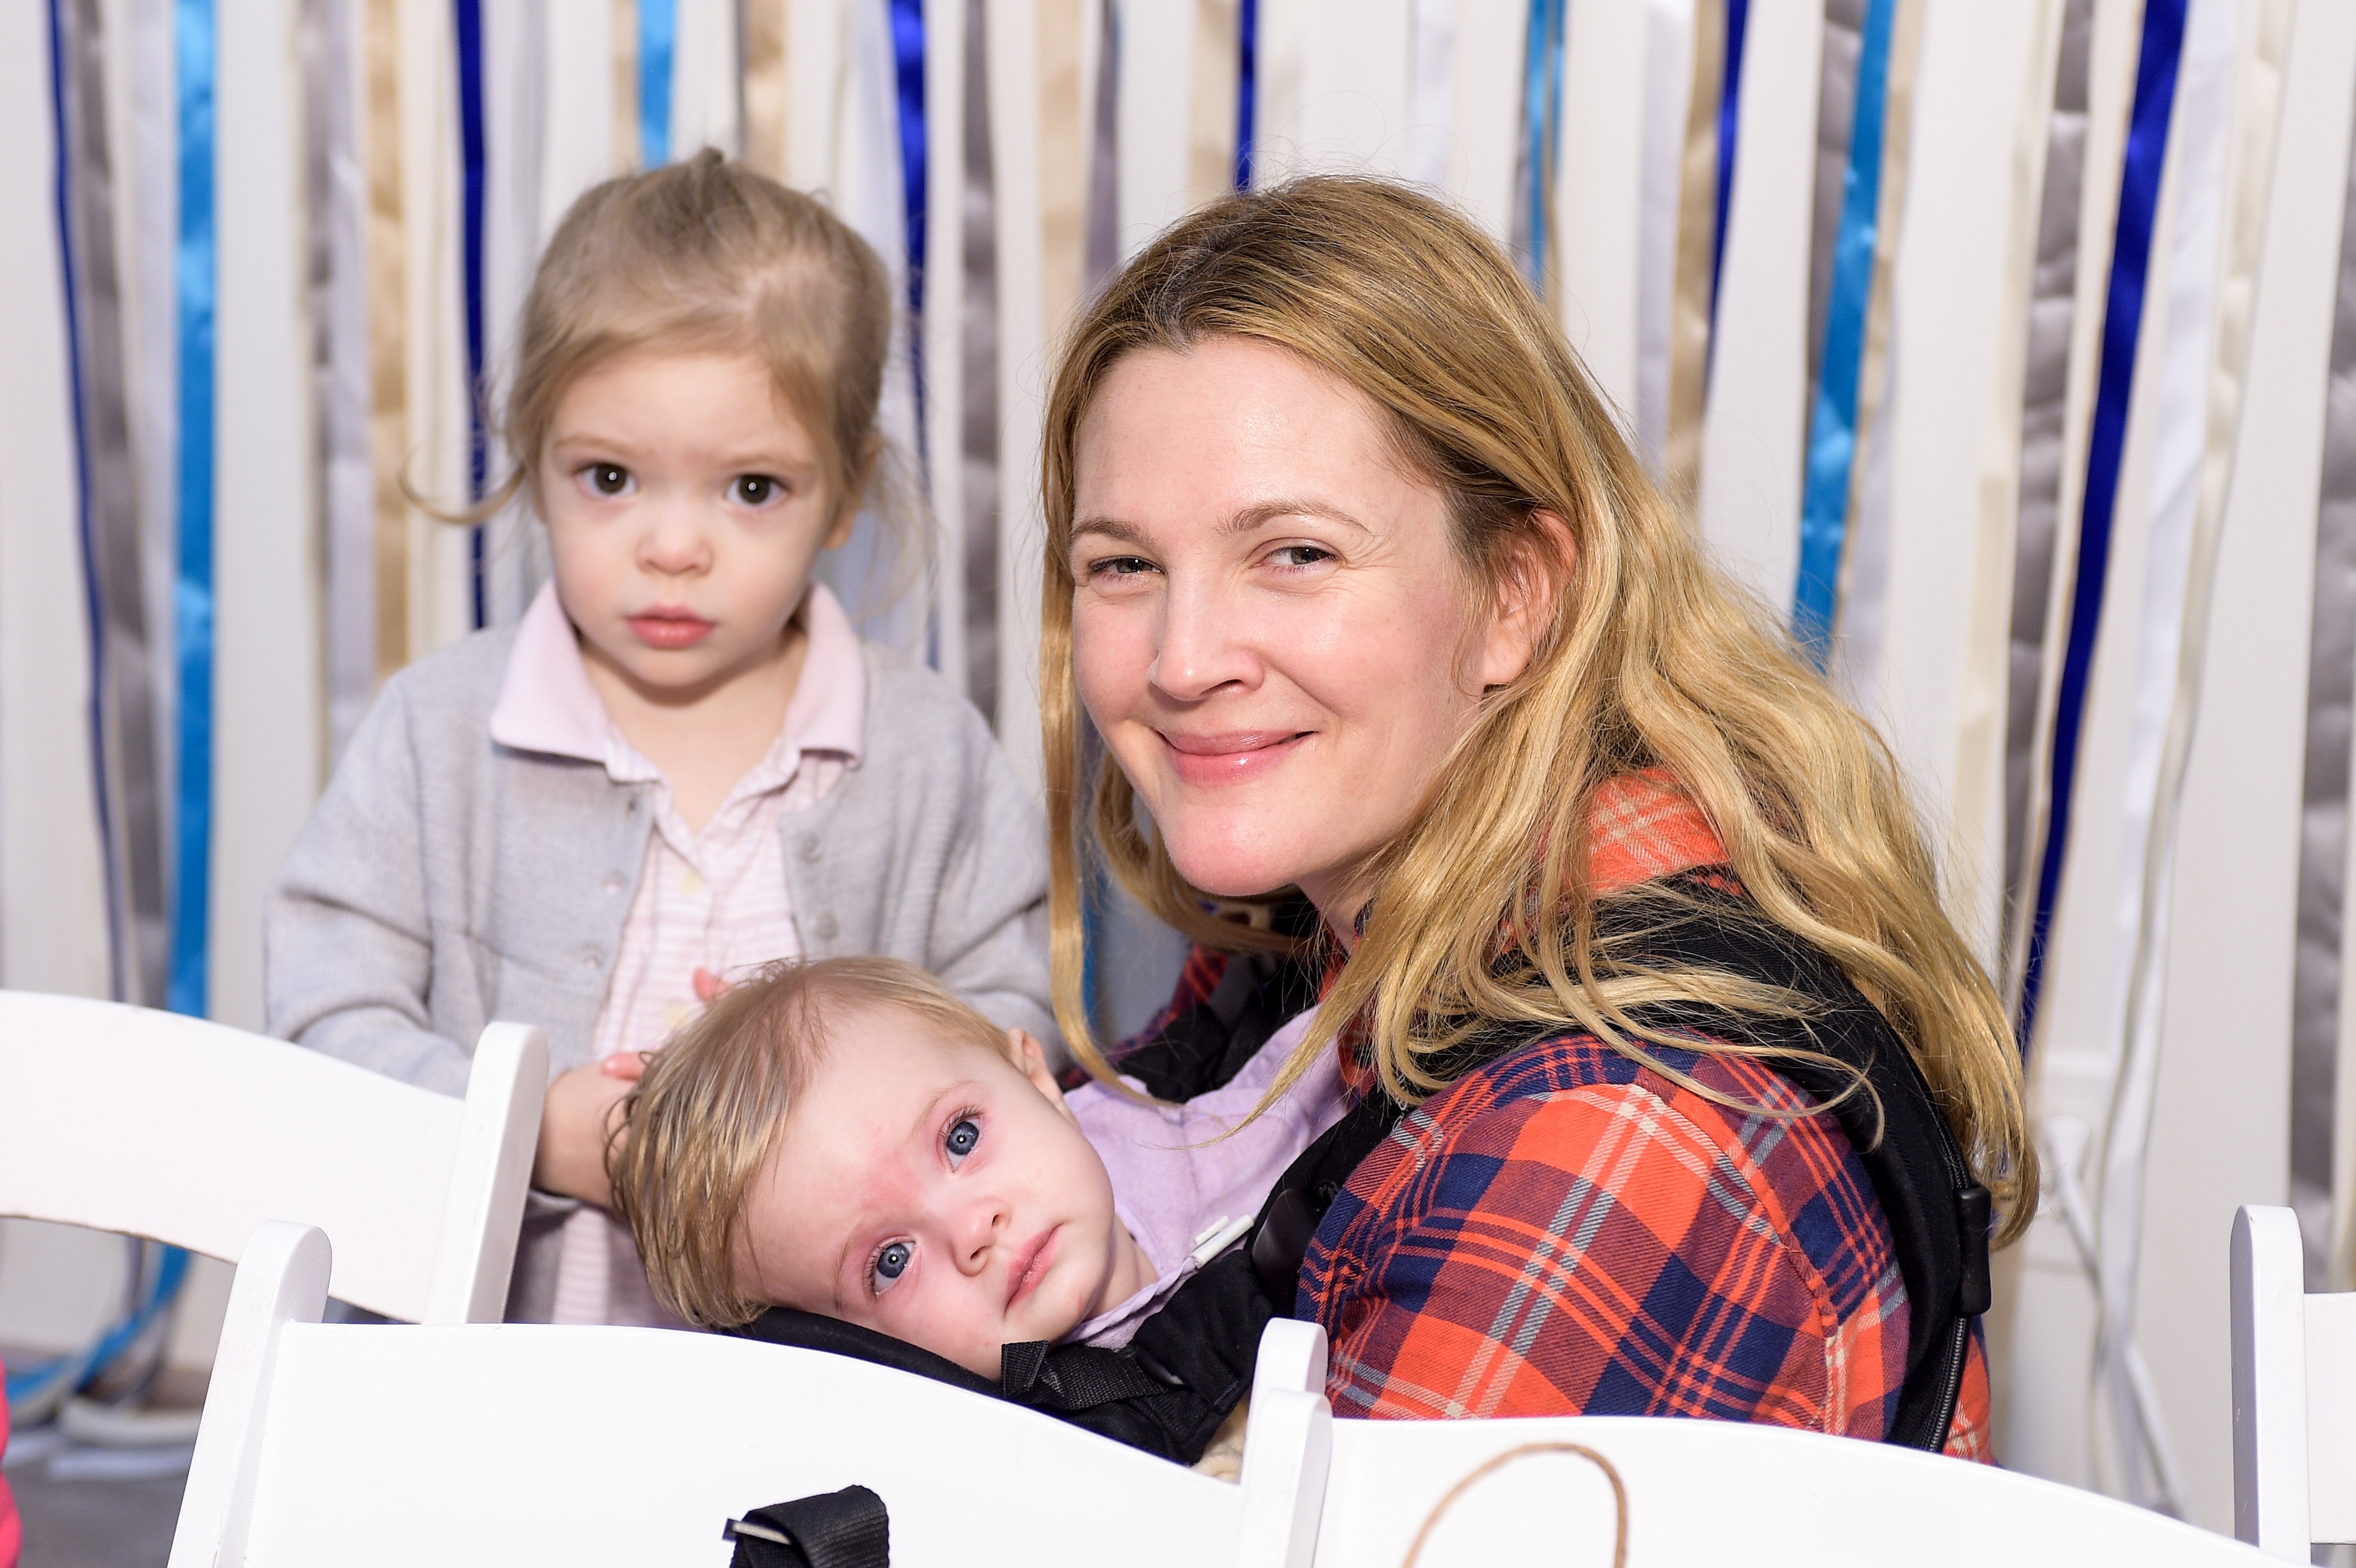 Drew Barrymore, Olive Barrymore Kopelman, and Frankie Barrymore Kopelman attending Baby2Baby Holiday Party on December 13, 2014 in Los Angeles, California. / Source: Getty Images